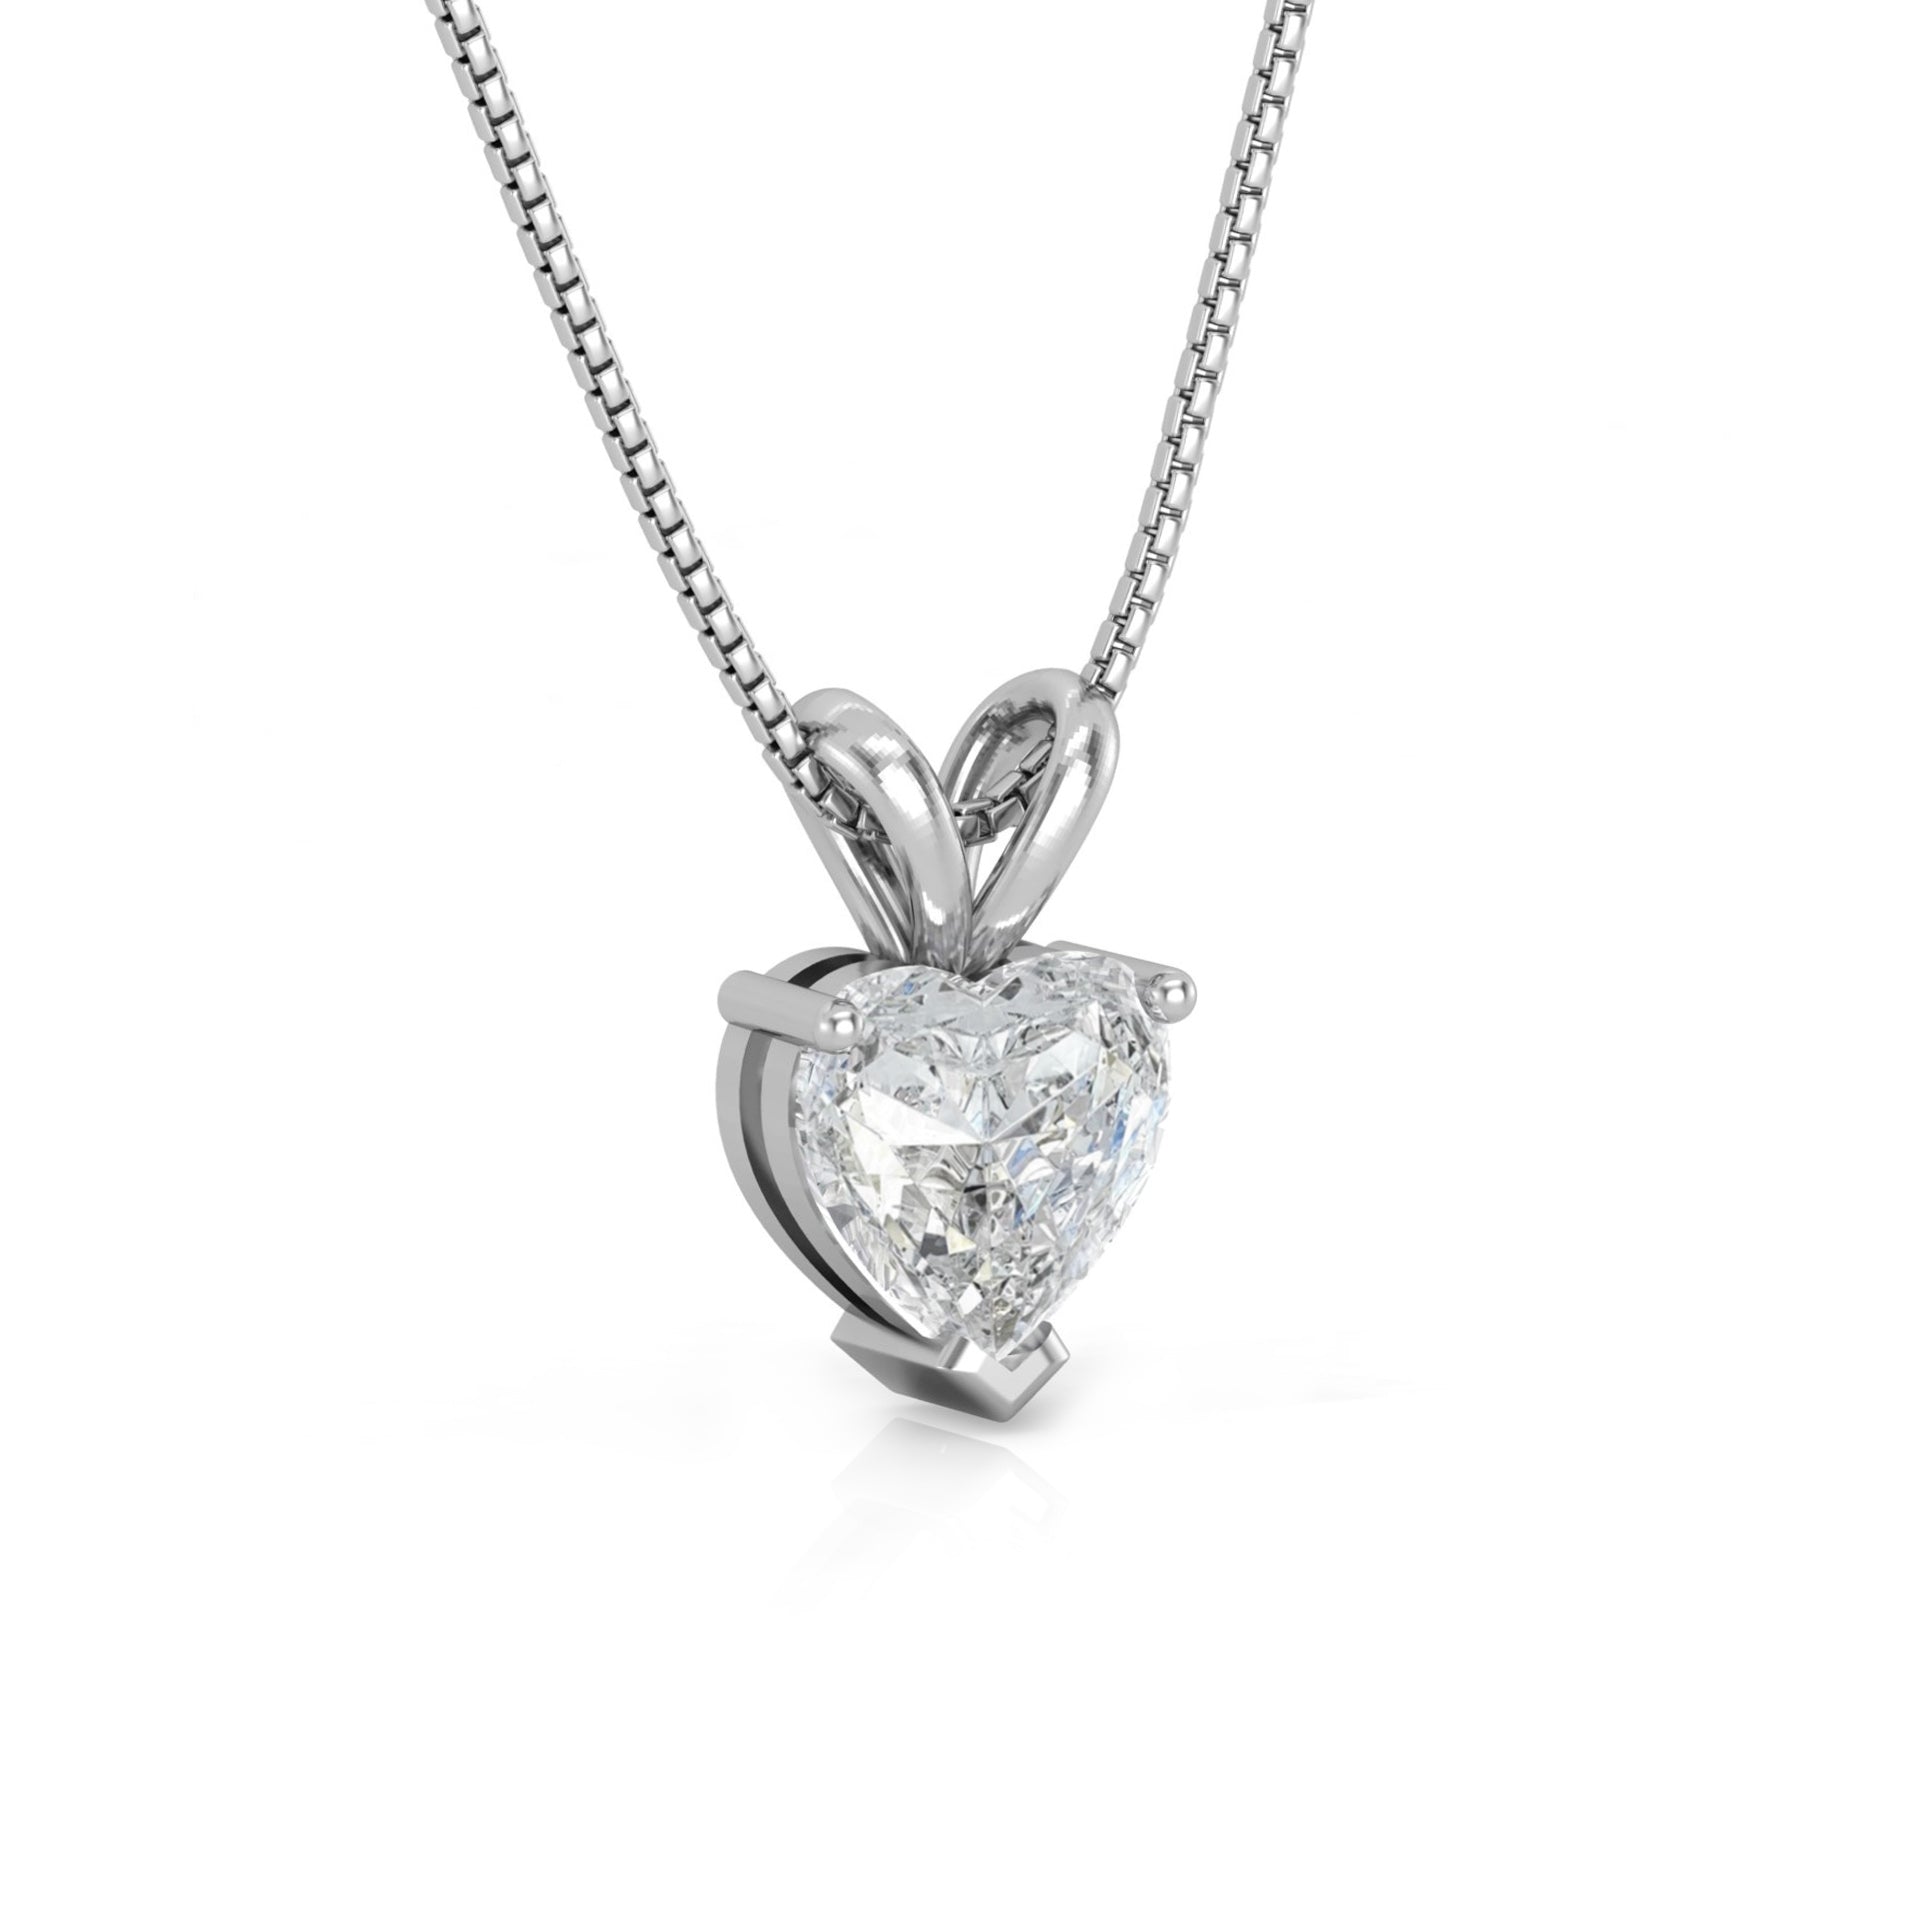 Blisse Allure 925 Sterling Silver Necklace With Heart Pendant